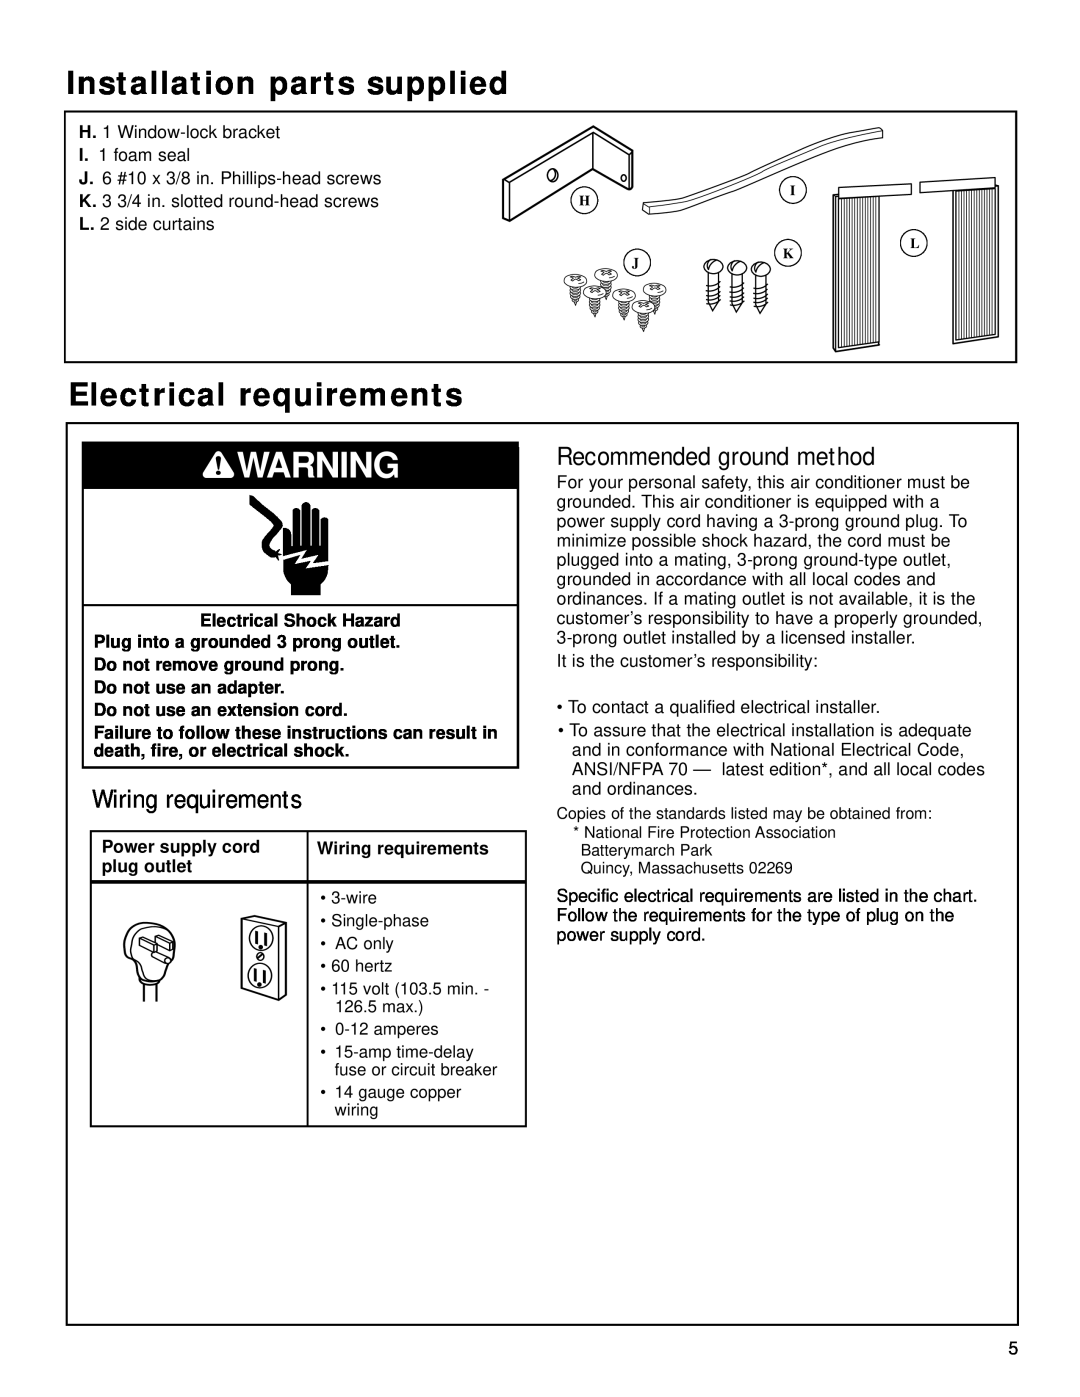 Whirlpool ACQ058MM0 Installation parts supplied, Electrical requirements, Wiring requirements, Recommended ground method 